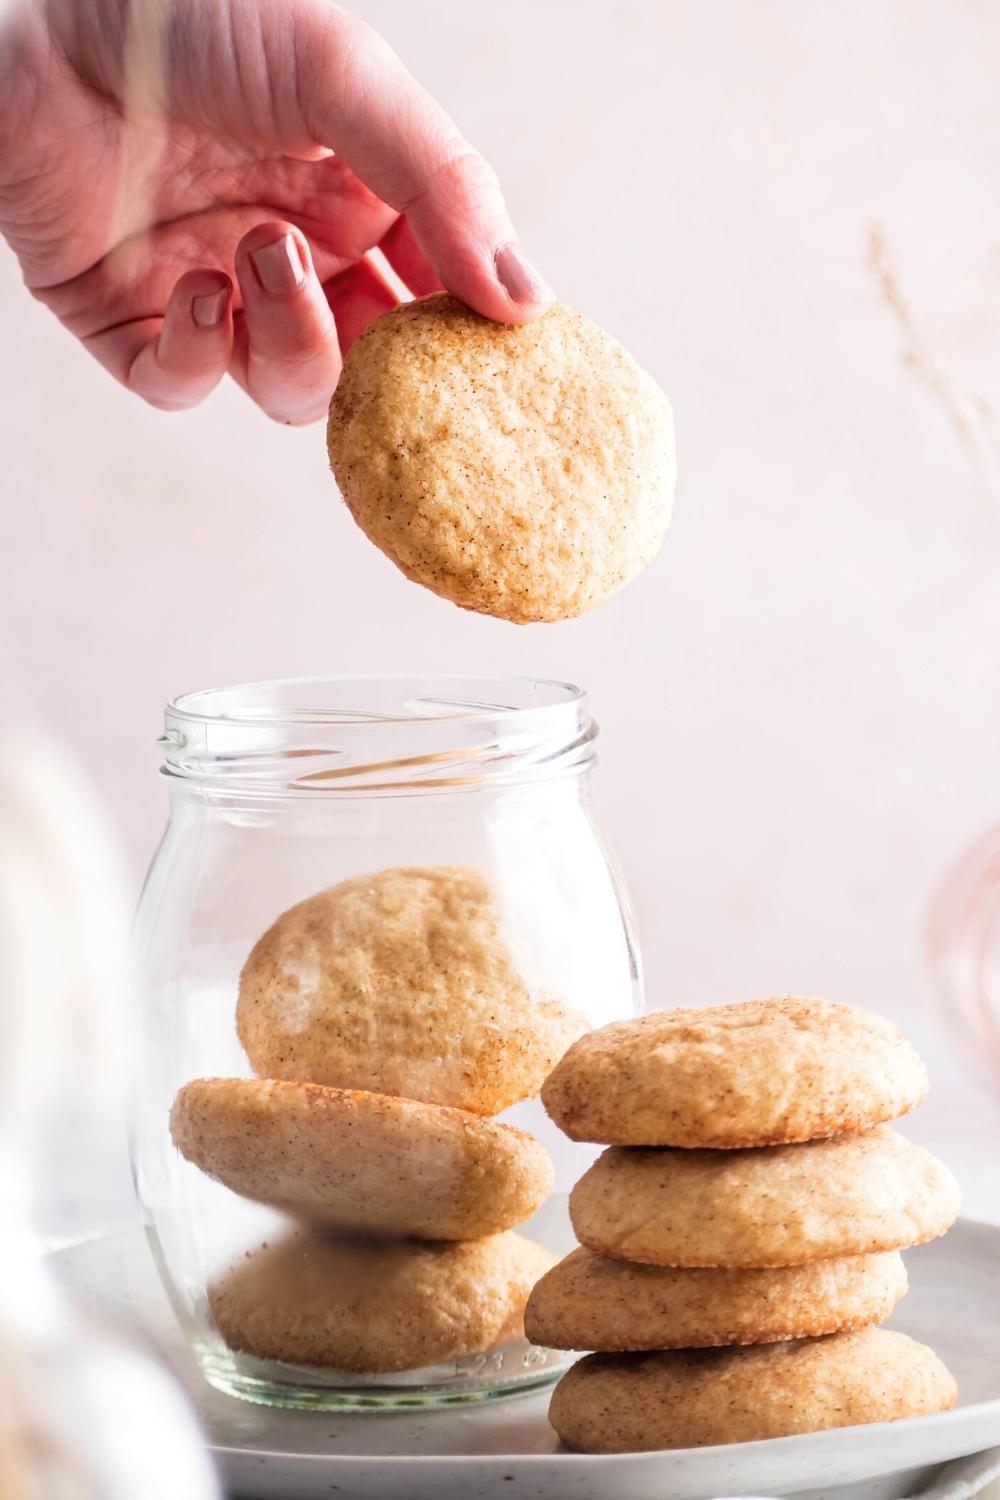 A hand holding a snickerdoodle cookie over a jar that has three more cookies in it and a white plate. Next to the jar is a stack of four snickerdoodle cookies.